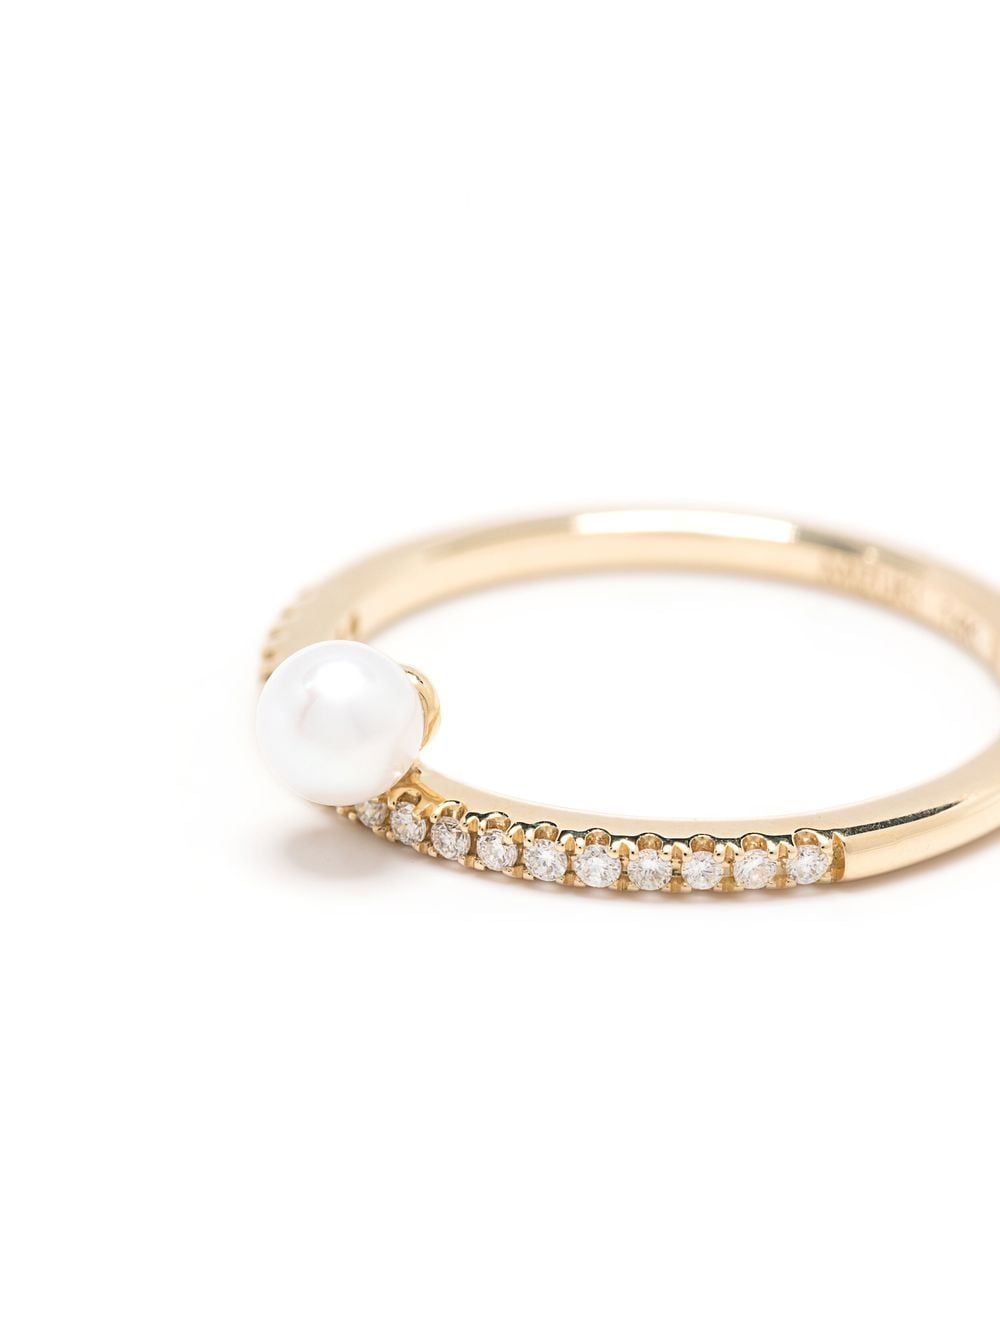 14KT YELLOW GOLD SEA OF BEAUTY DIAMOND AND PEARL BAND RING